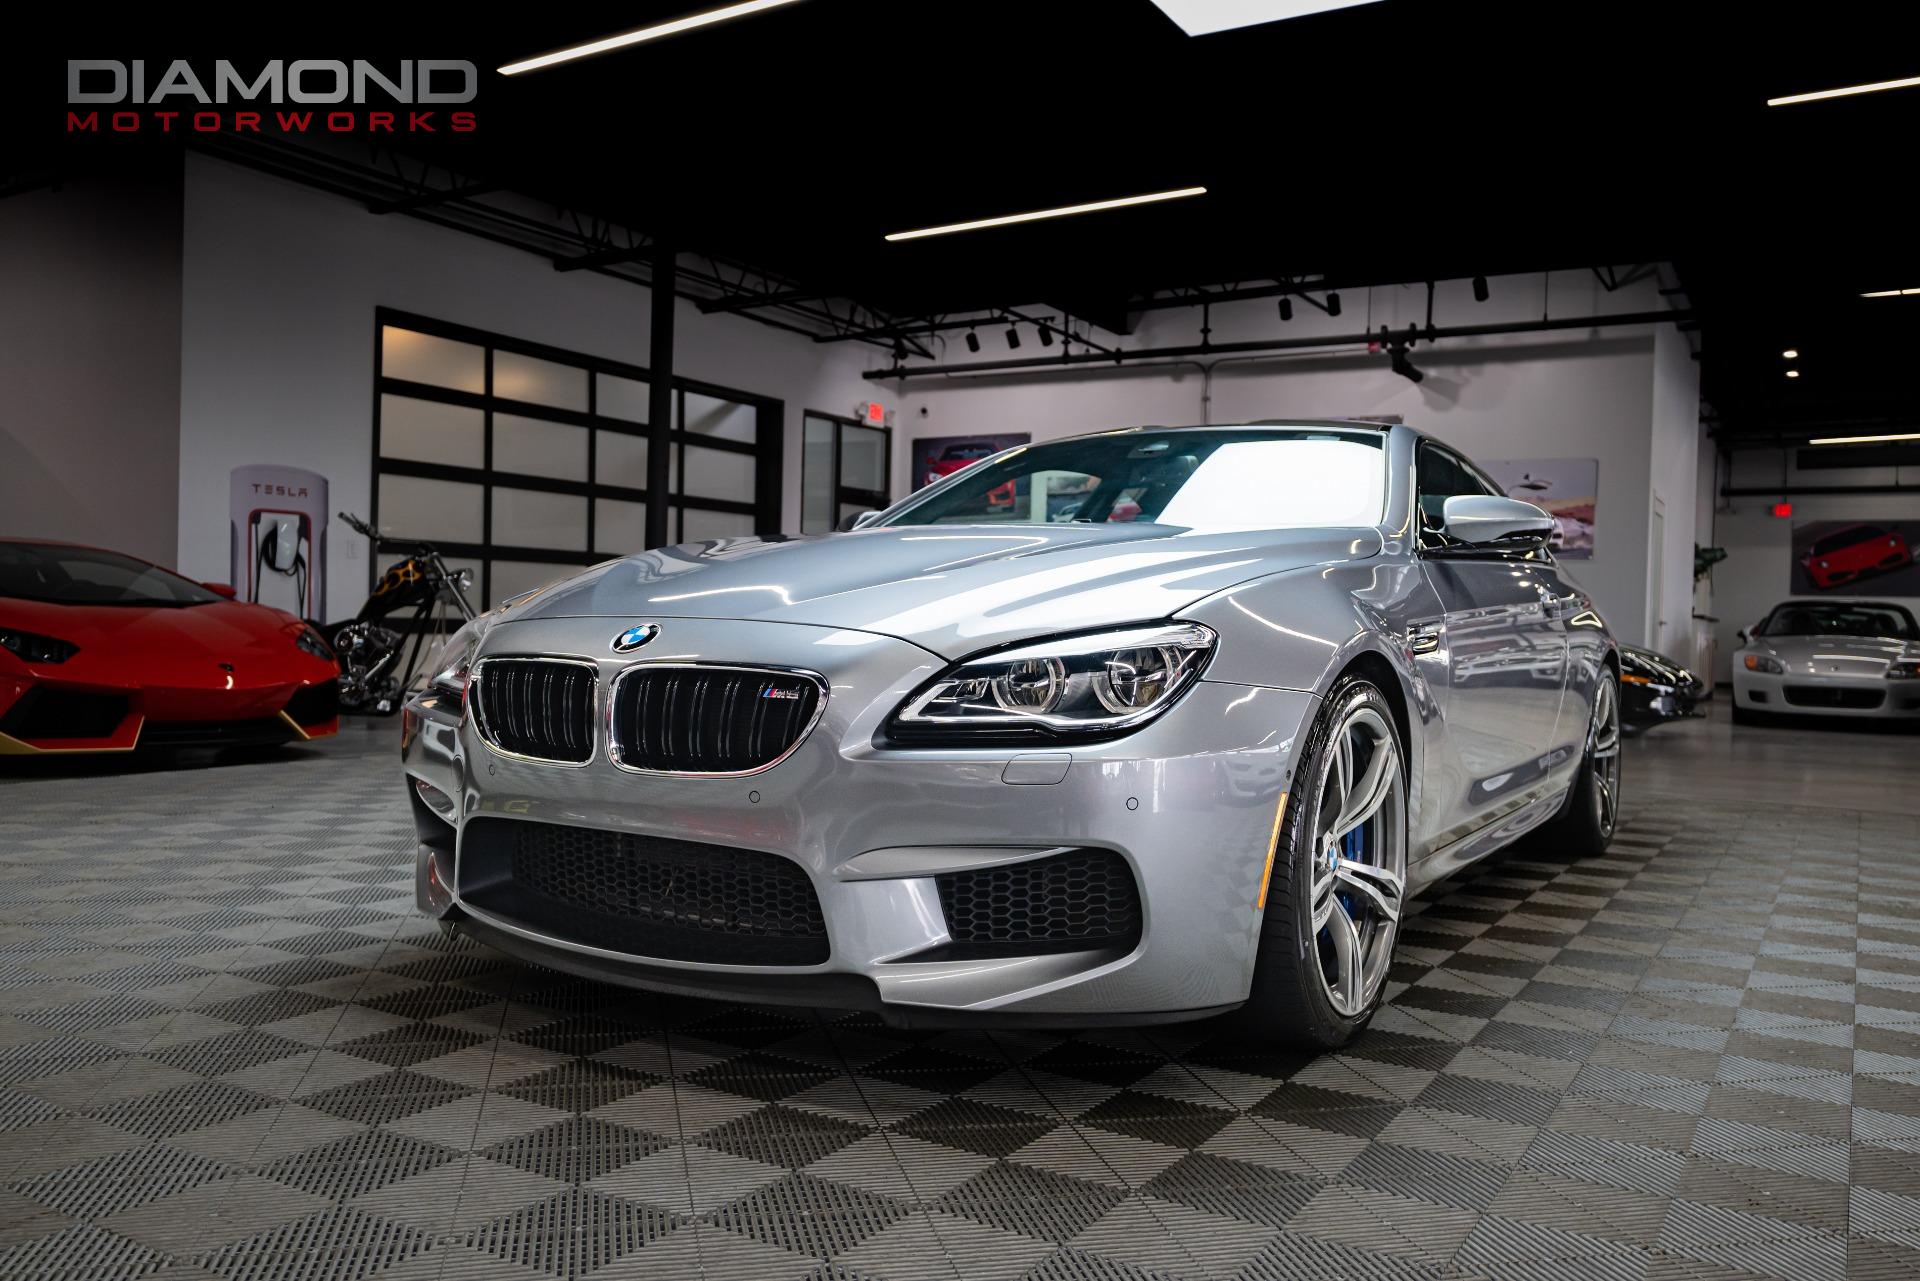 Used 2017 BMW M6 Coupe For Sale ($76,800) | Diamond Motorworks 